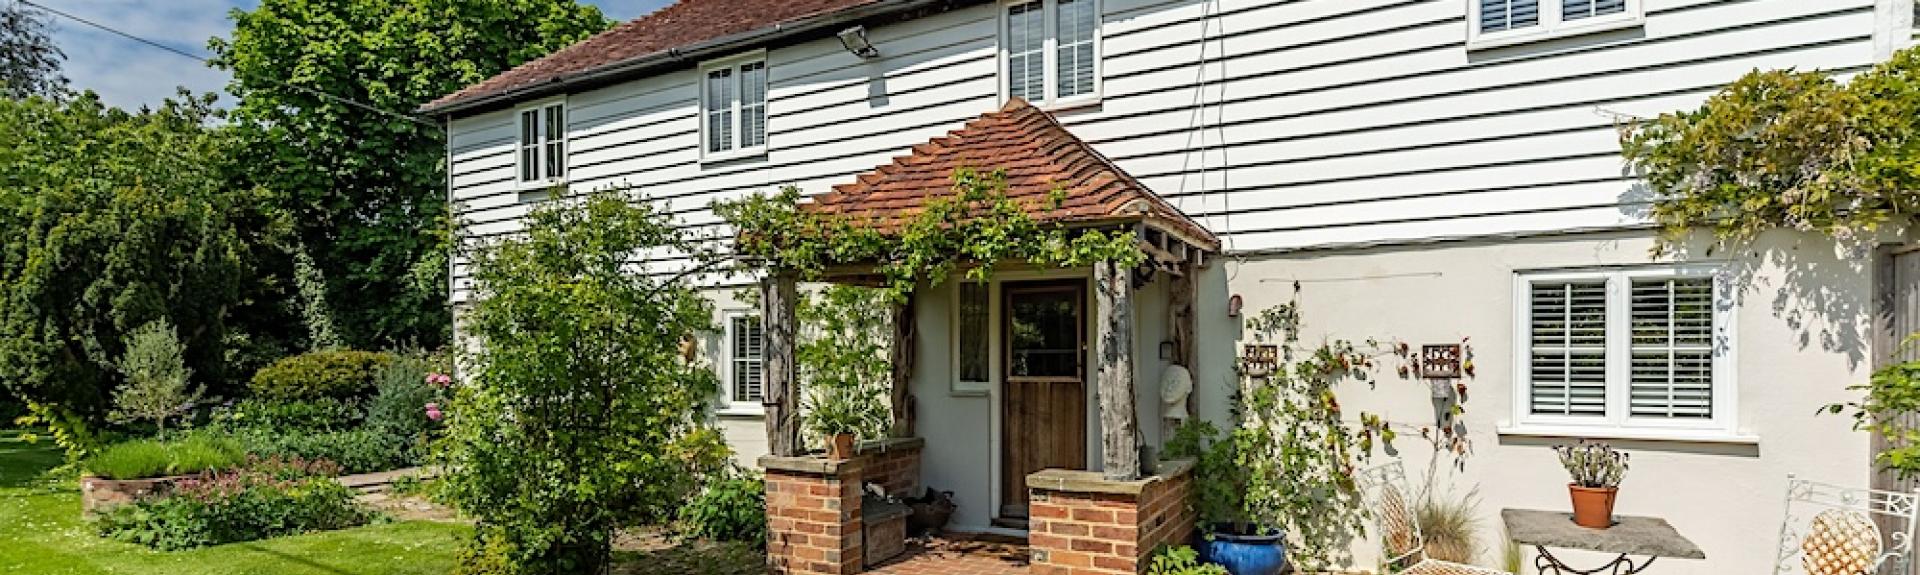 Exterior of a weather-boarded East Sussex Cottage and lawned garden.